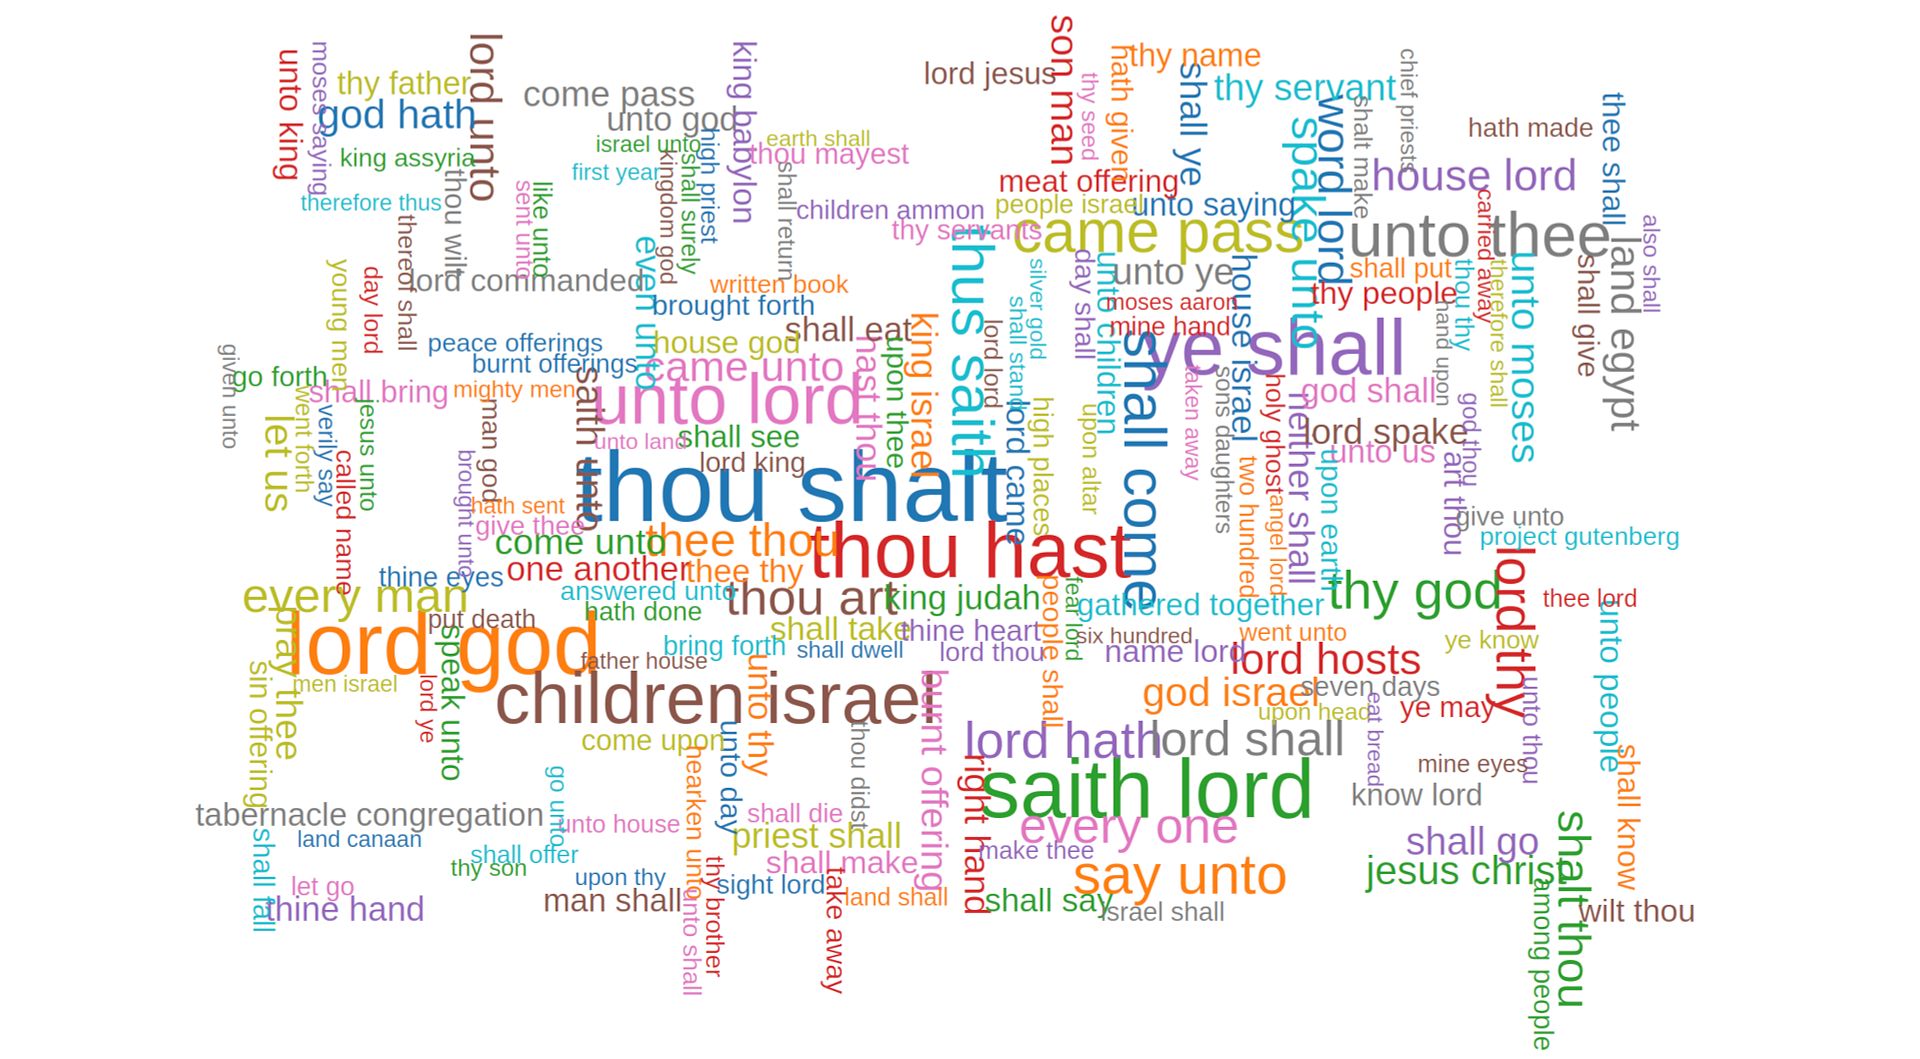 200-top-two-word-phrases-from-bible.jpg